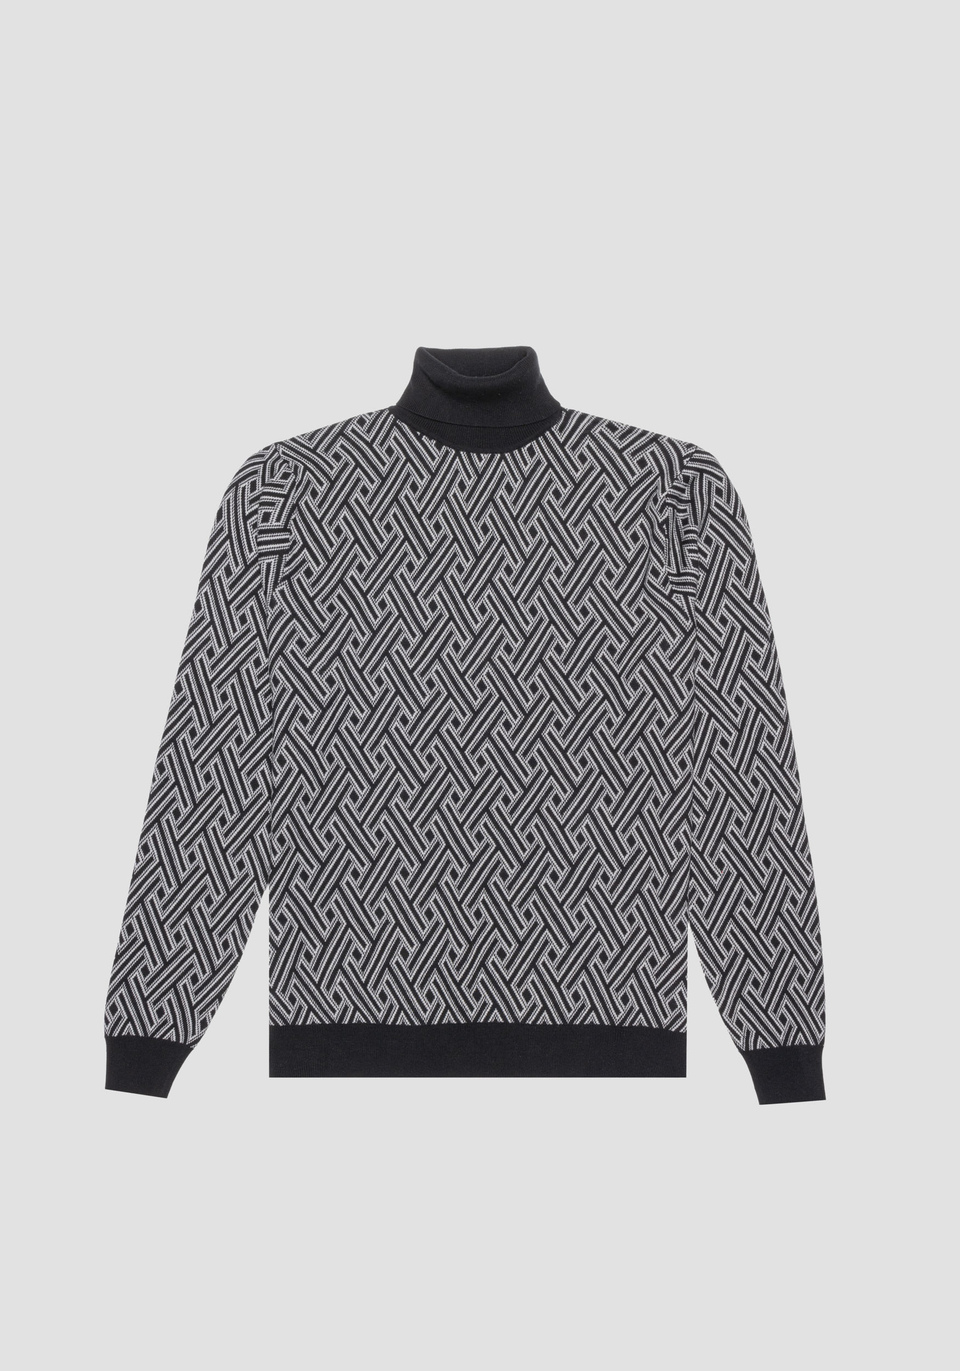 REGULAR FIT SWEATER IN PURE COTTON WITH GEOMETRIC PATTERN - Antony Morato Online Shop